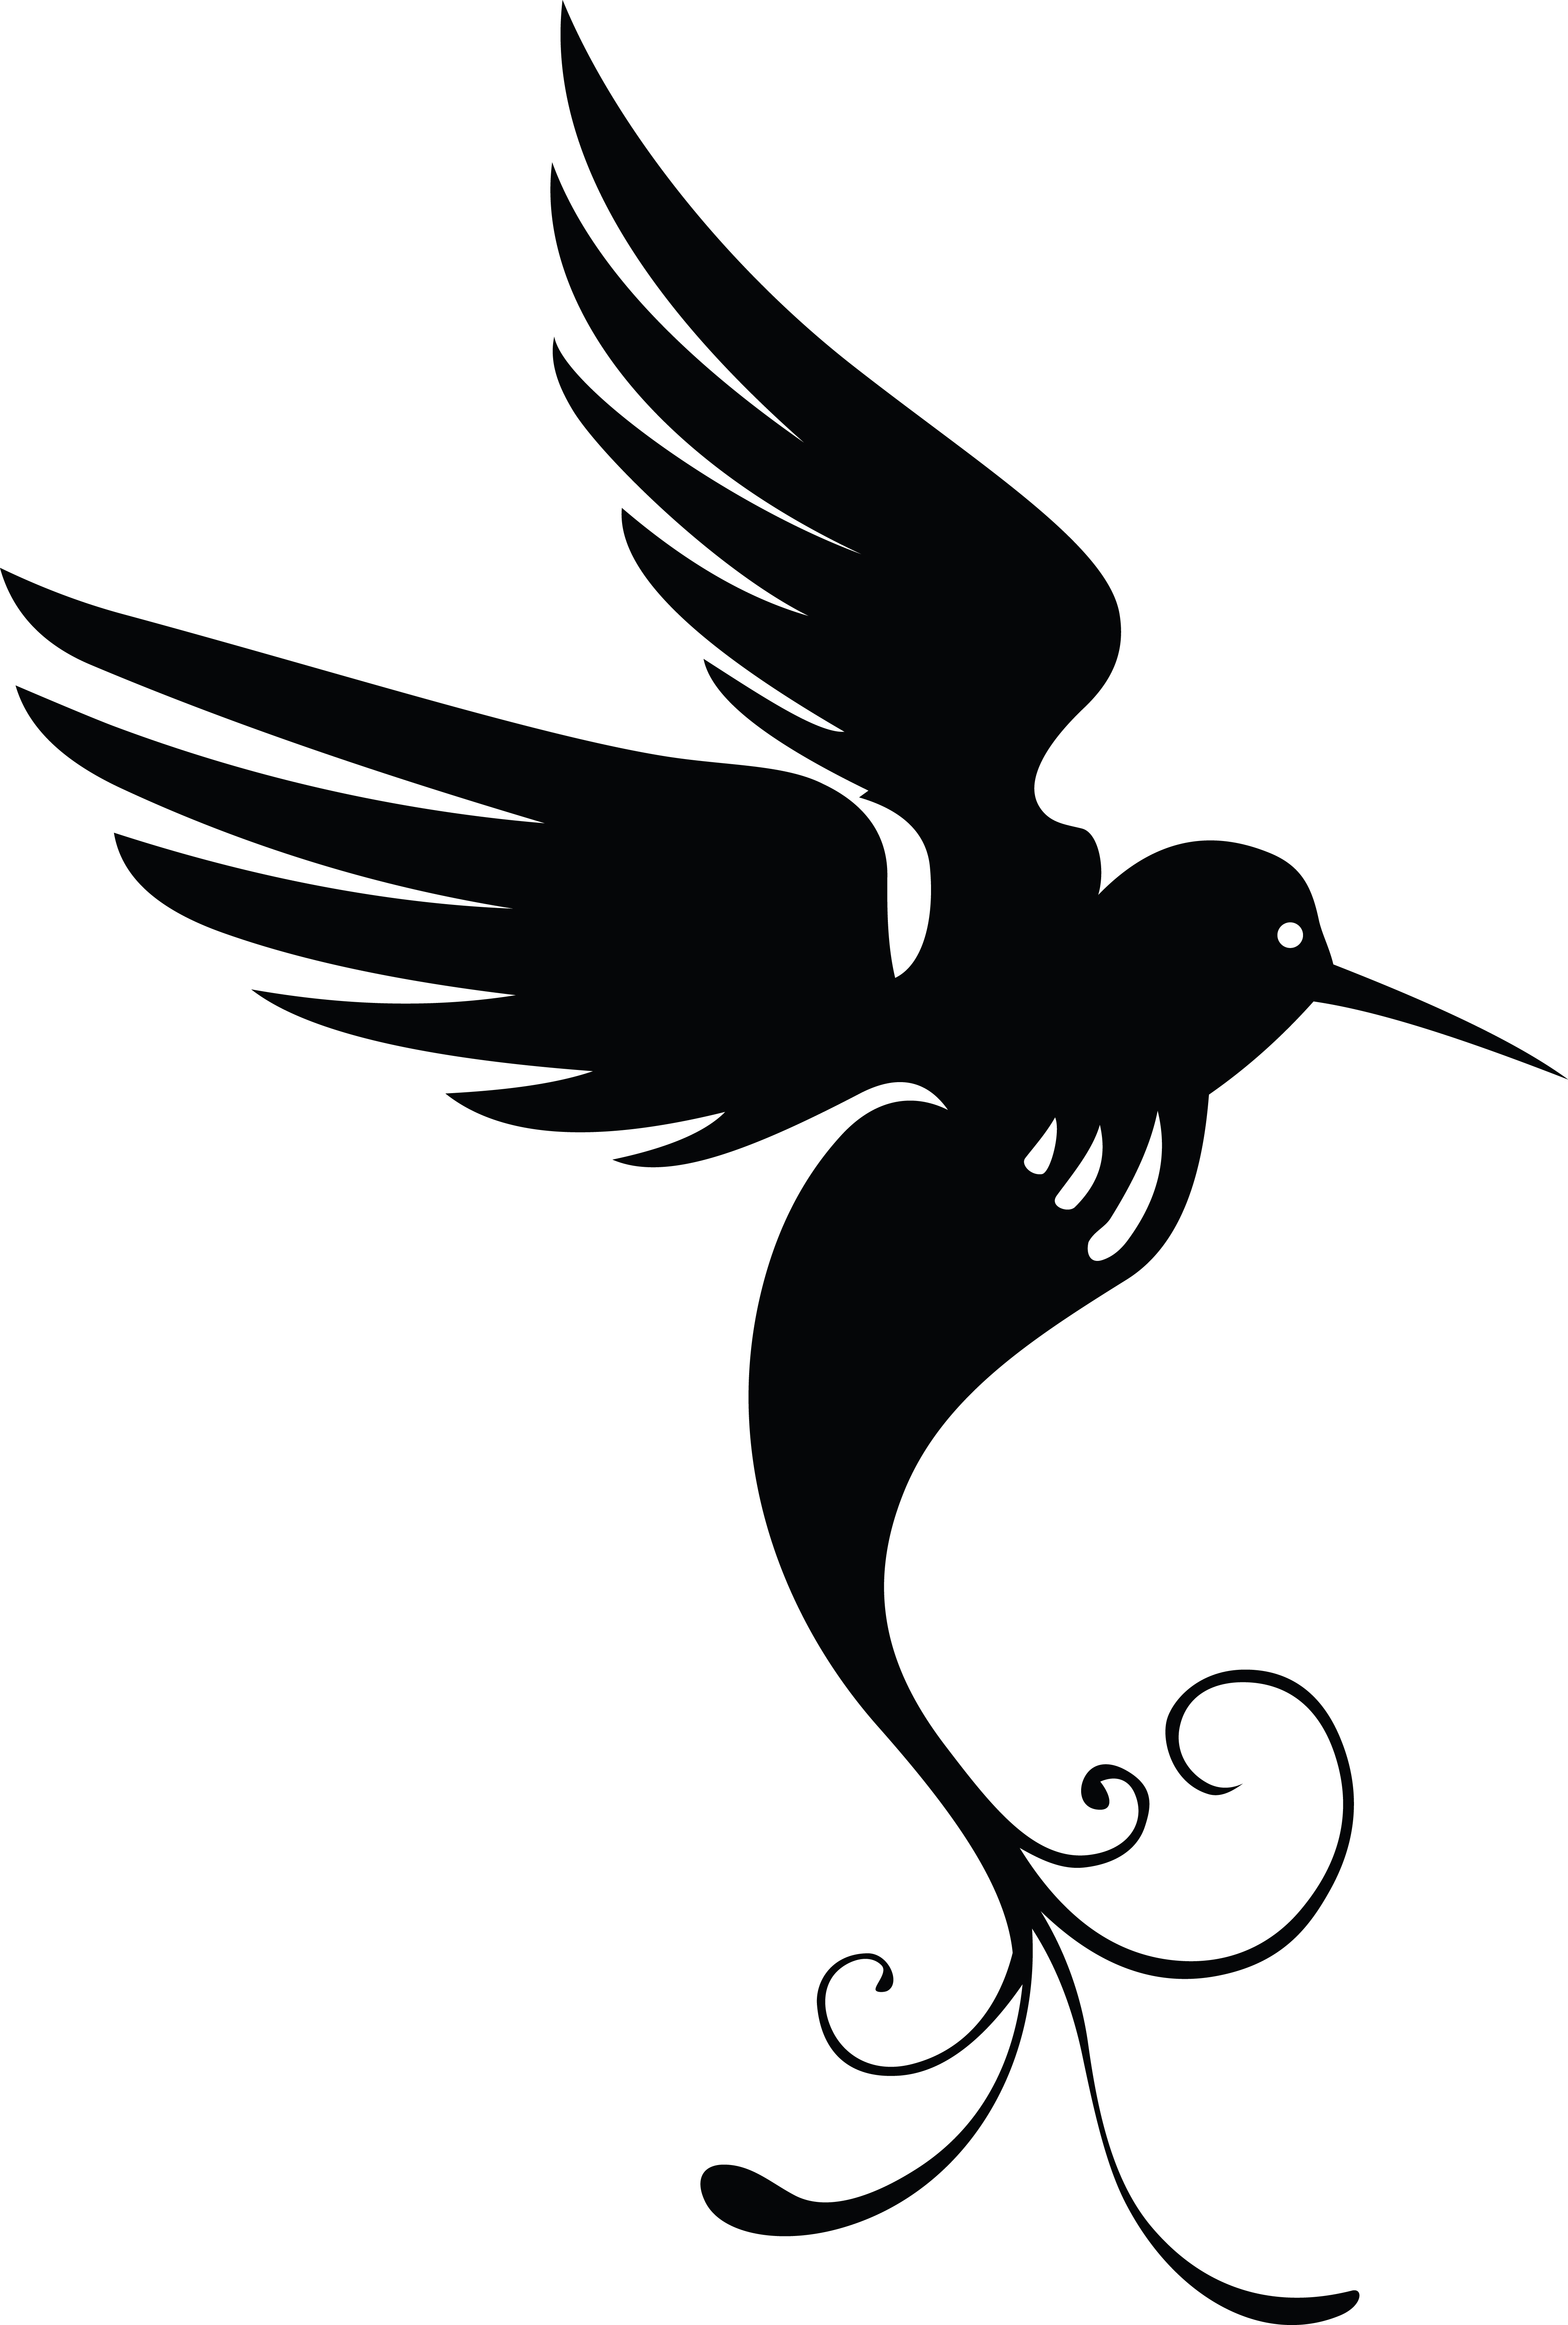 Free Clipart Of A Black and White HummingBird Silhouette